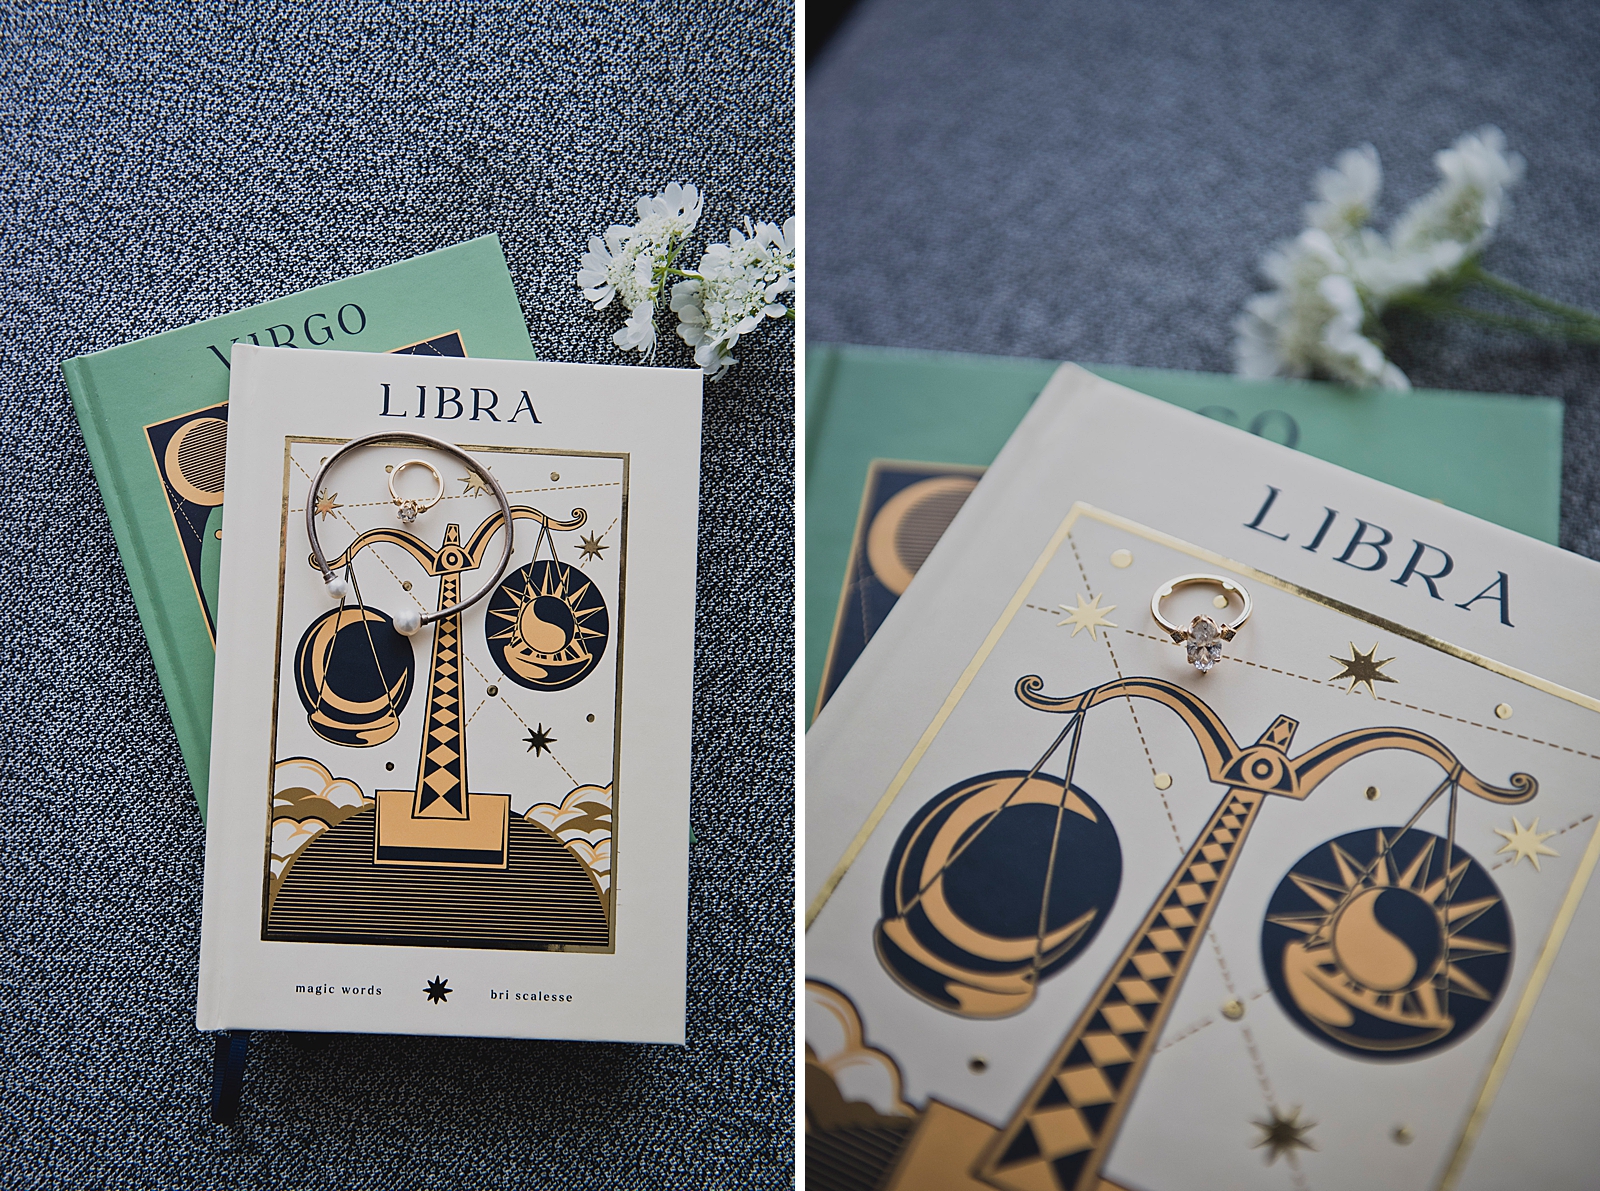 Left photo: Close up shot of the bride's bracelet and engagement ring on top of a Virgo book and a Libra book.
Right photo: Close up shot of the bride's engagement ring on top of a Virgo book and a Libra book. 